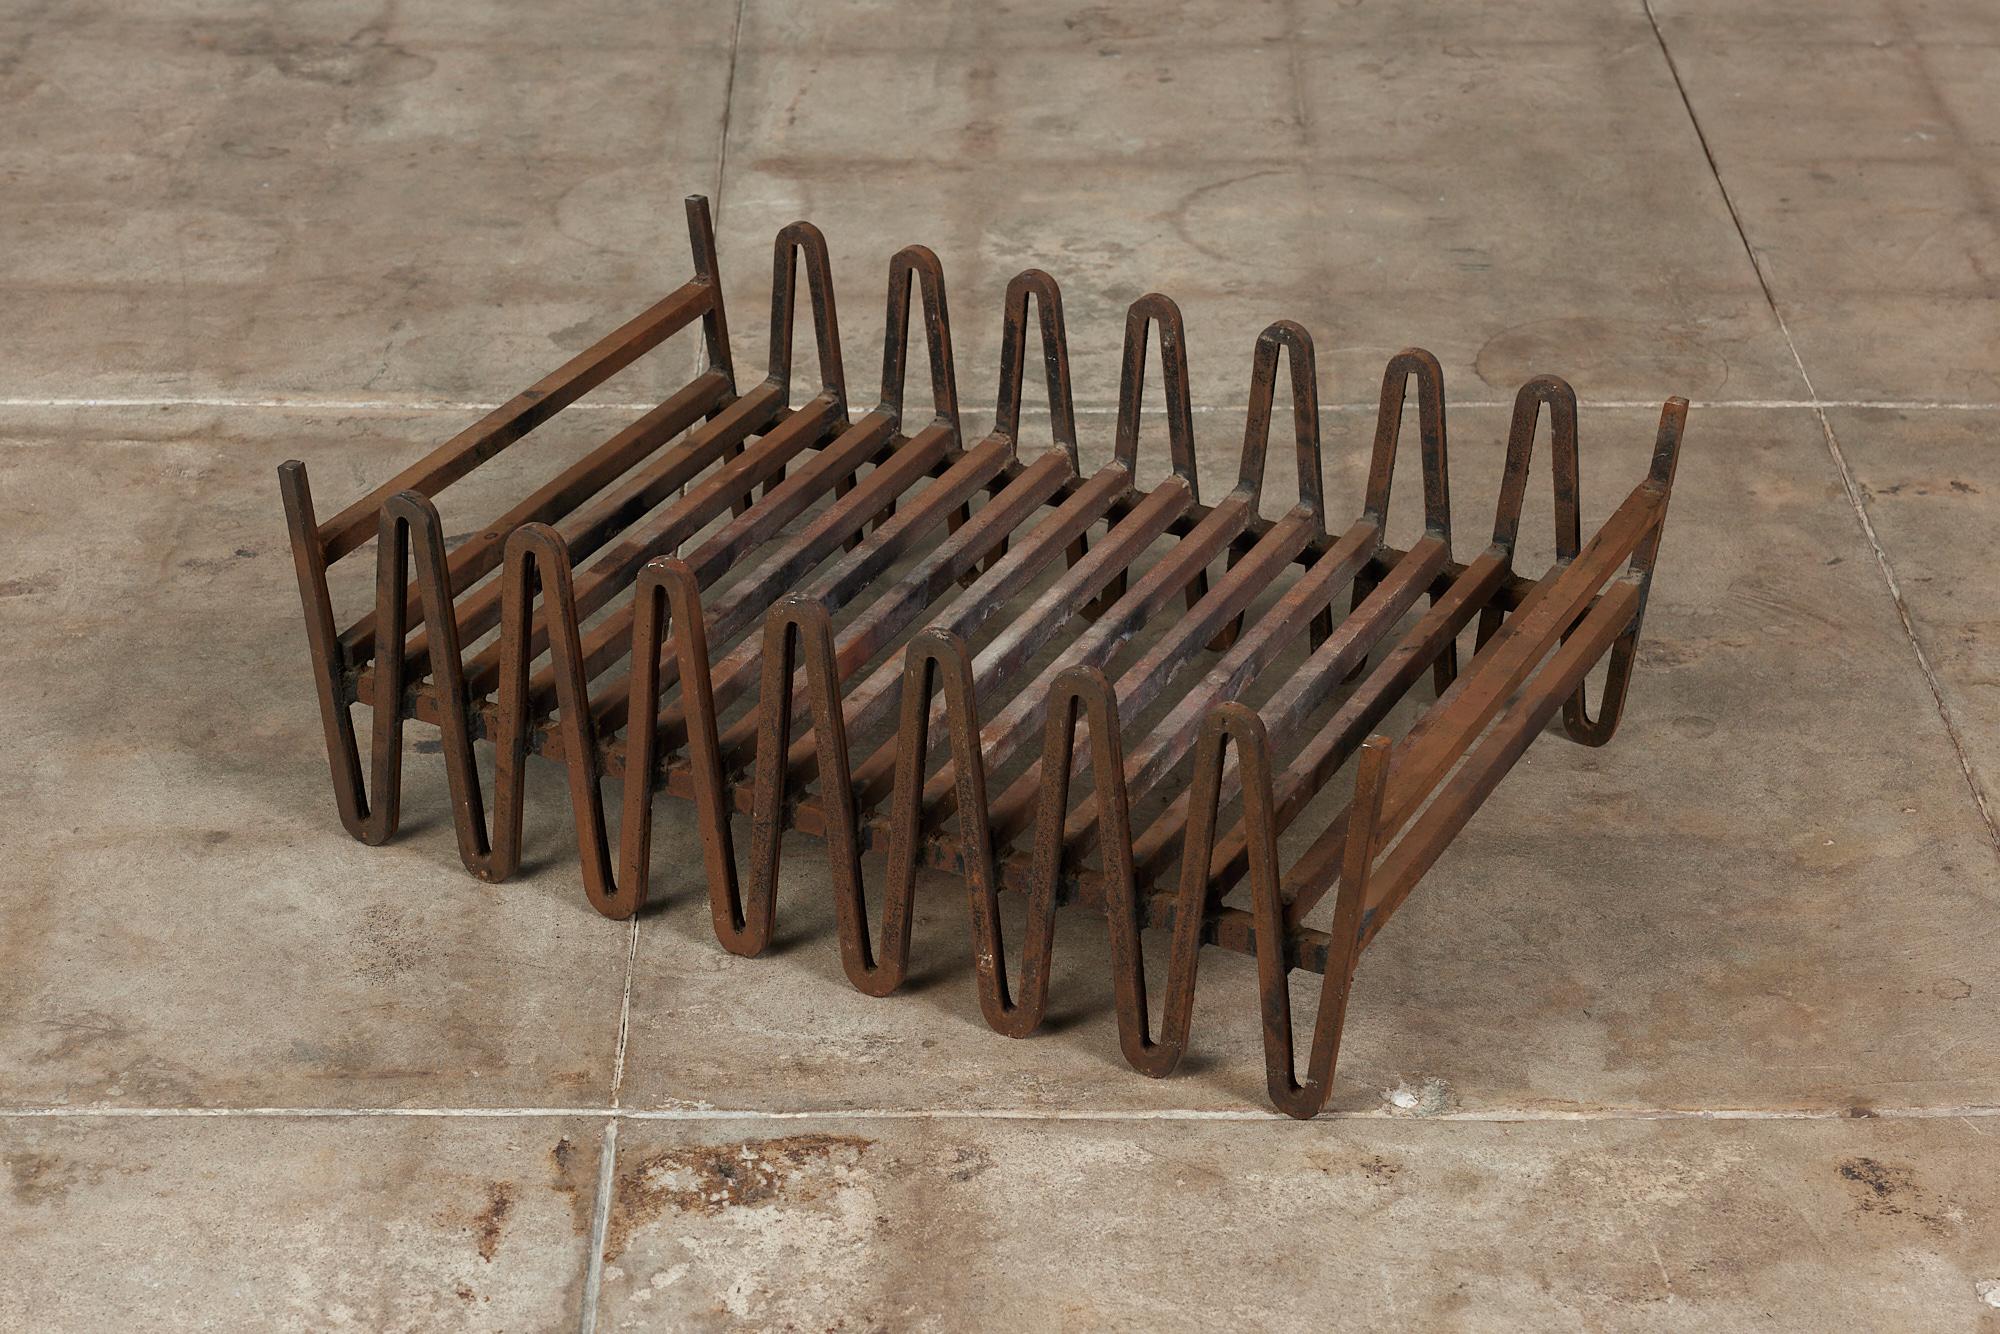 Custom designed double sided fire grate by Mel Bogart for Felmore Associates, USA, c.1950s. This grate was a custom piece for Craig Ellwood designed, Zimmerman House, located in the West Los Angeles community of Brentwood. This wrought iron design